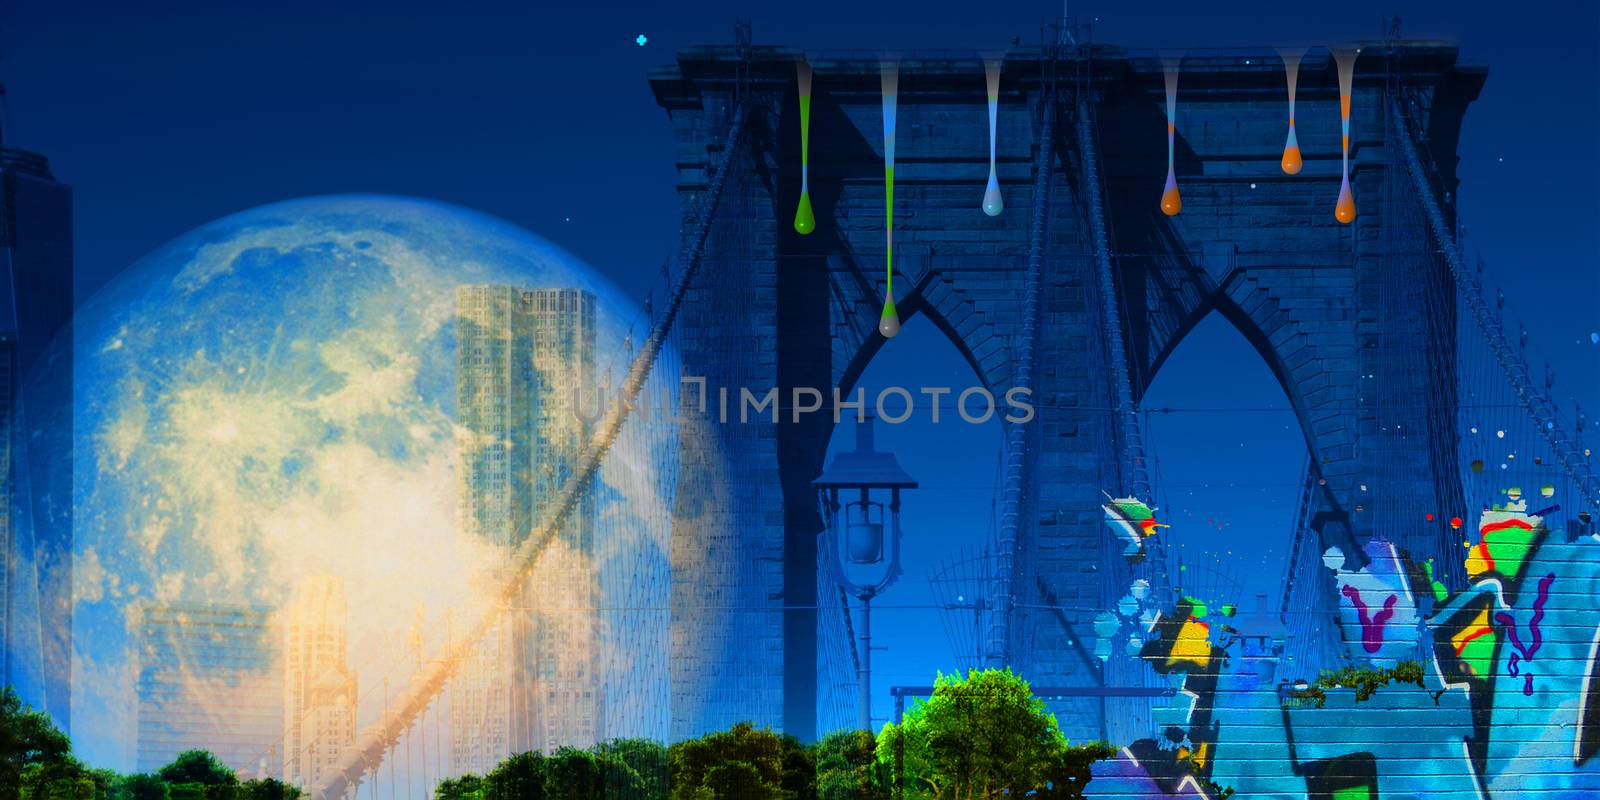 Surreal digital art. Brooklyn bridge on New York's cityscape. Giant moon, pieces of graffiti and paint drops